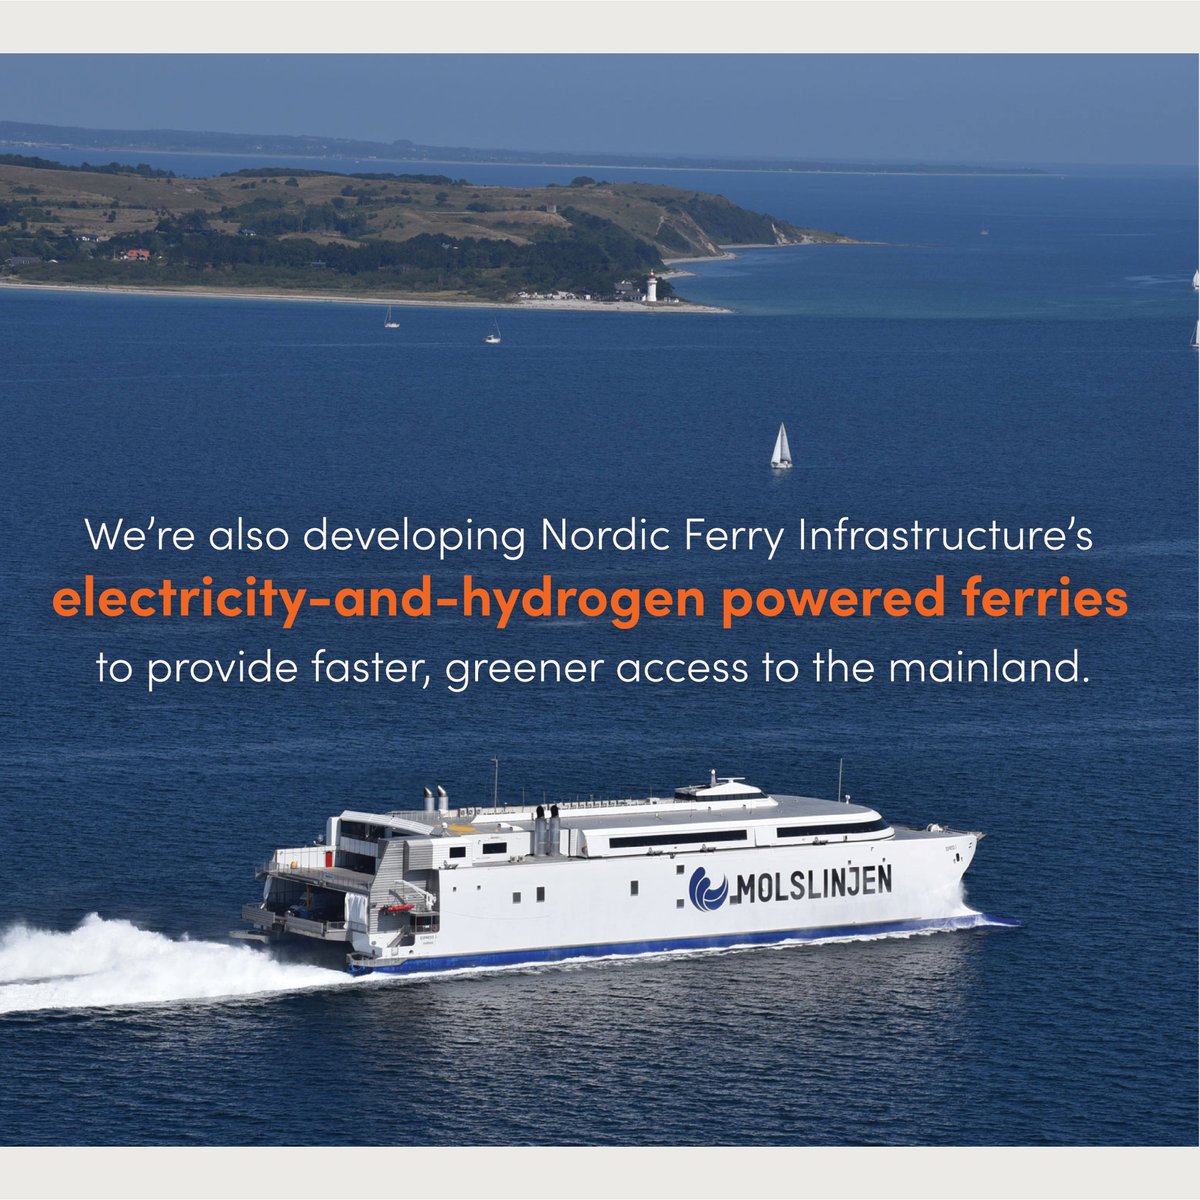 At EQT we’re committed to bringing outcome-oriented investments to the seas with our investments in @candelaboats and Nordic Ferry Infrastructure. Together, we're charting a new course by developing ferries powered in part by electricity and hydrogen, transforming commutes. 🚢